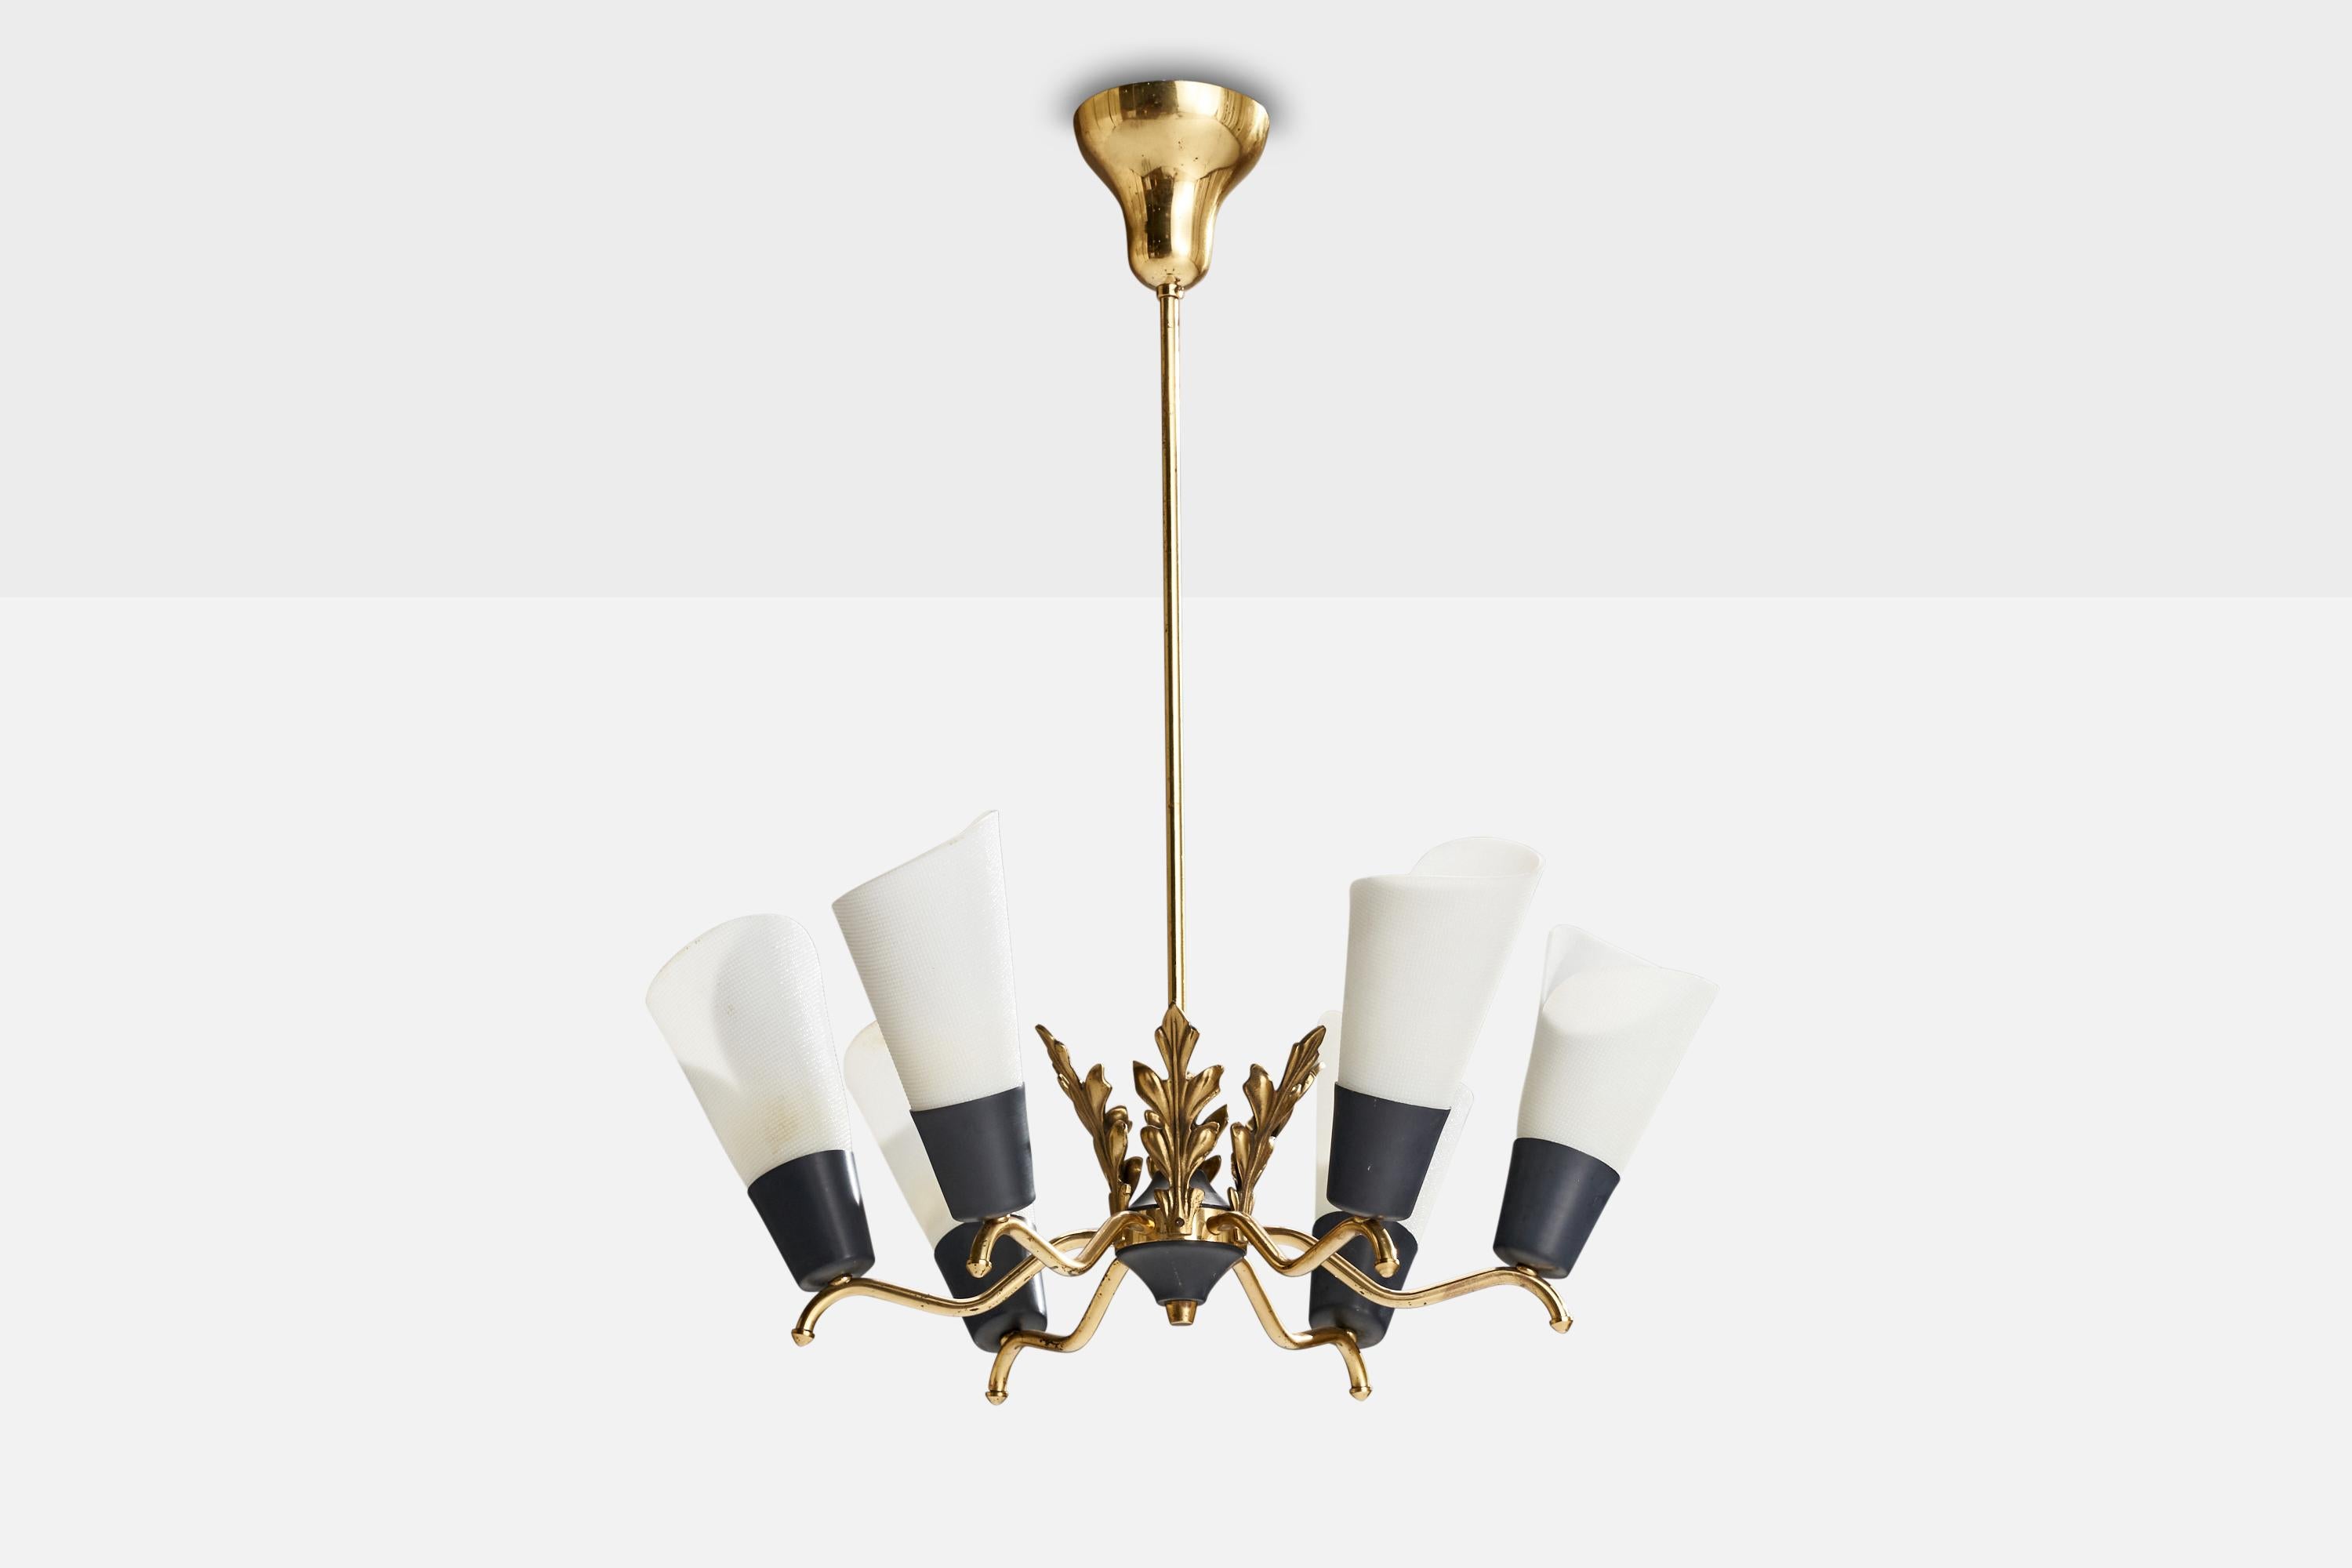 A brass, black-lacquered metal and white acrylic chandelier designed and produced in Sweden, 1950s.

Dimensions of canopy (inches): 4.33” H x 4.25” Diameter
Socket takes standard E-14 bulbs. 6 socket.There is no maximum wattage stated on the